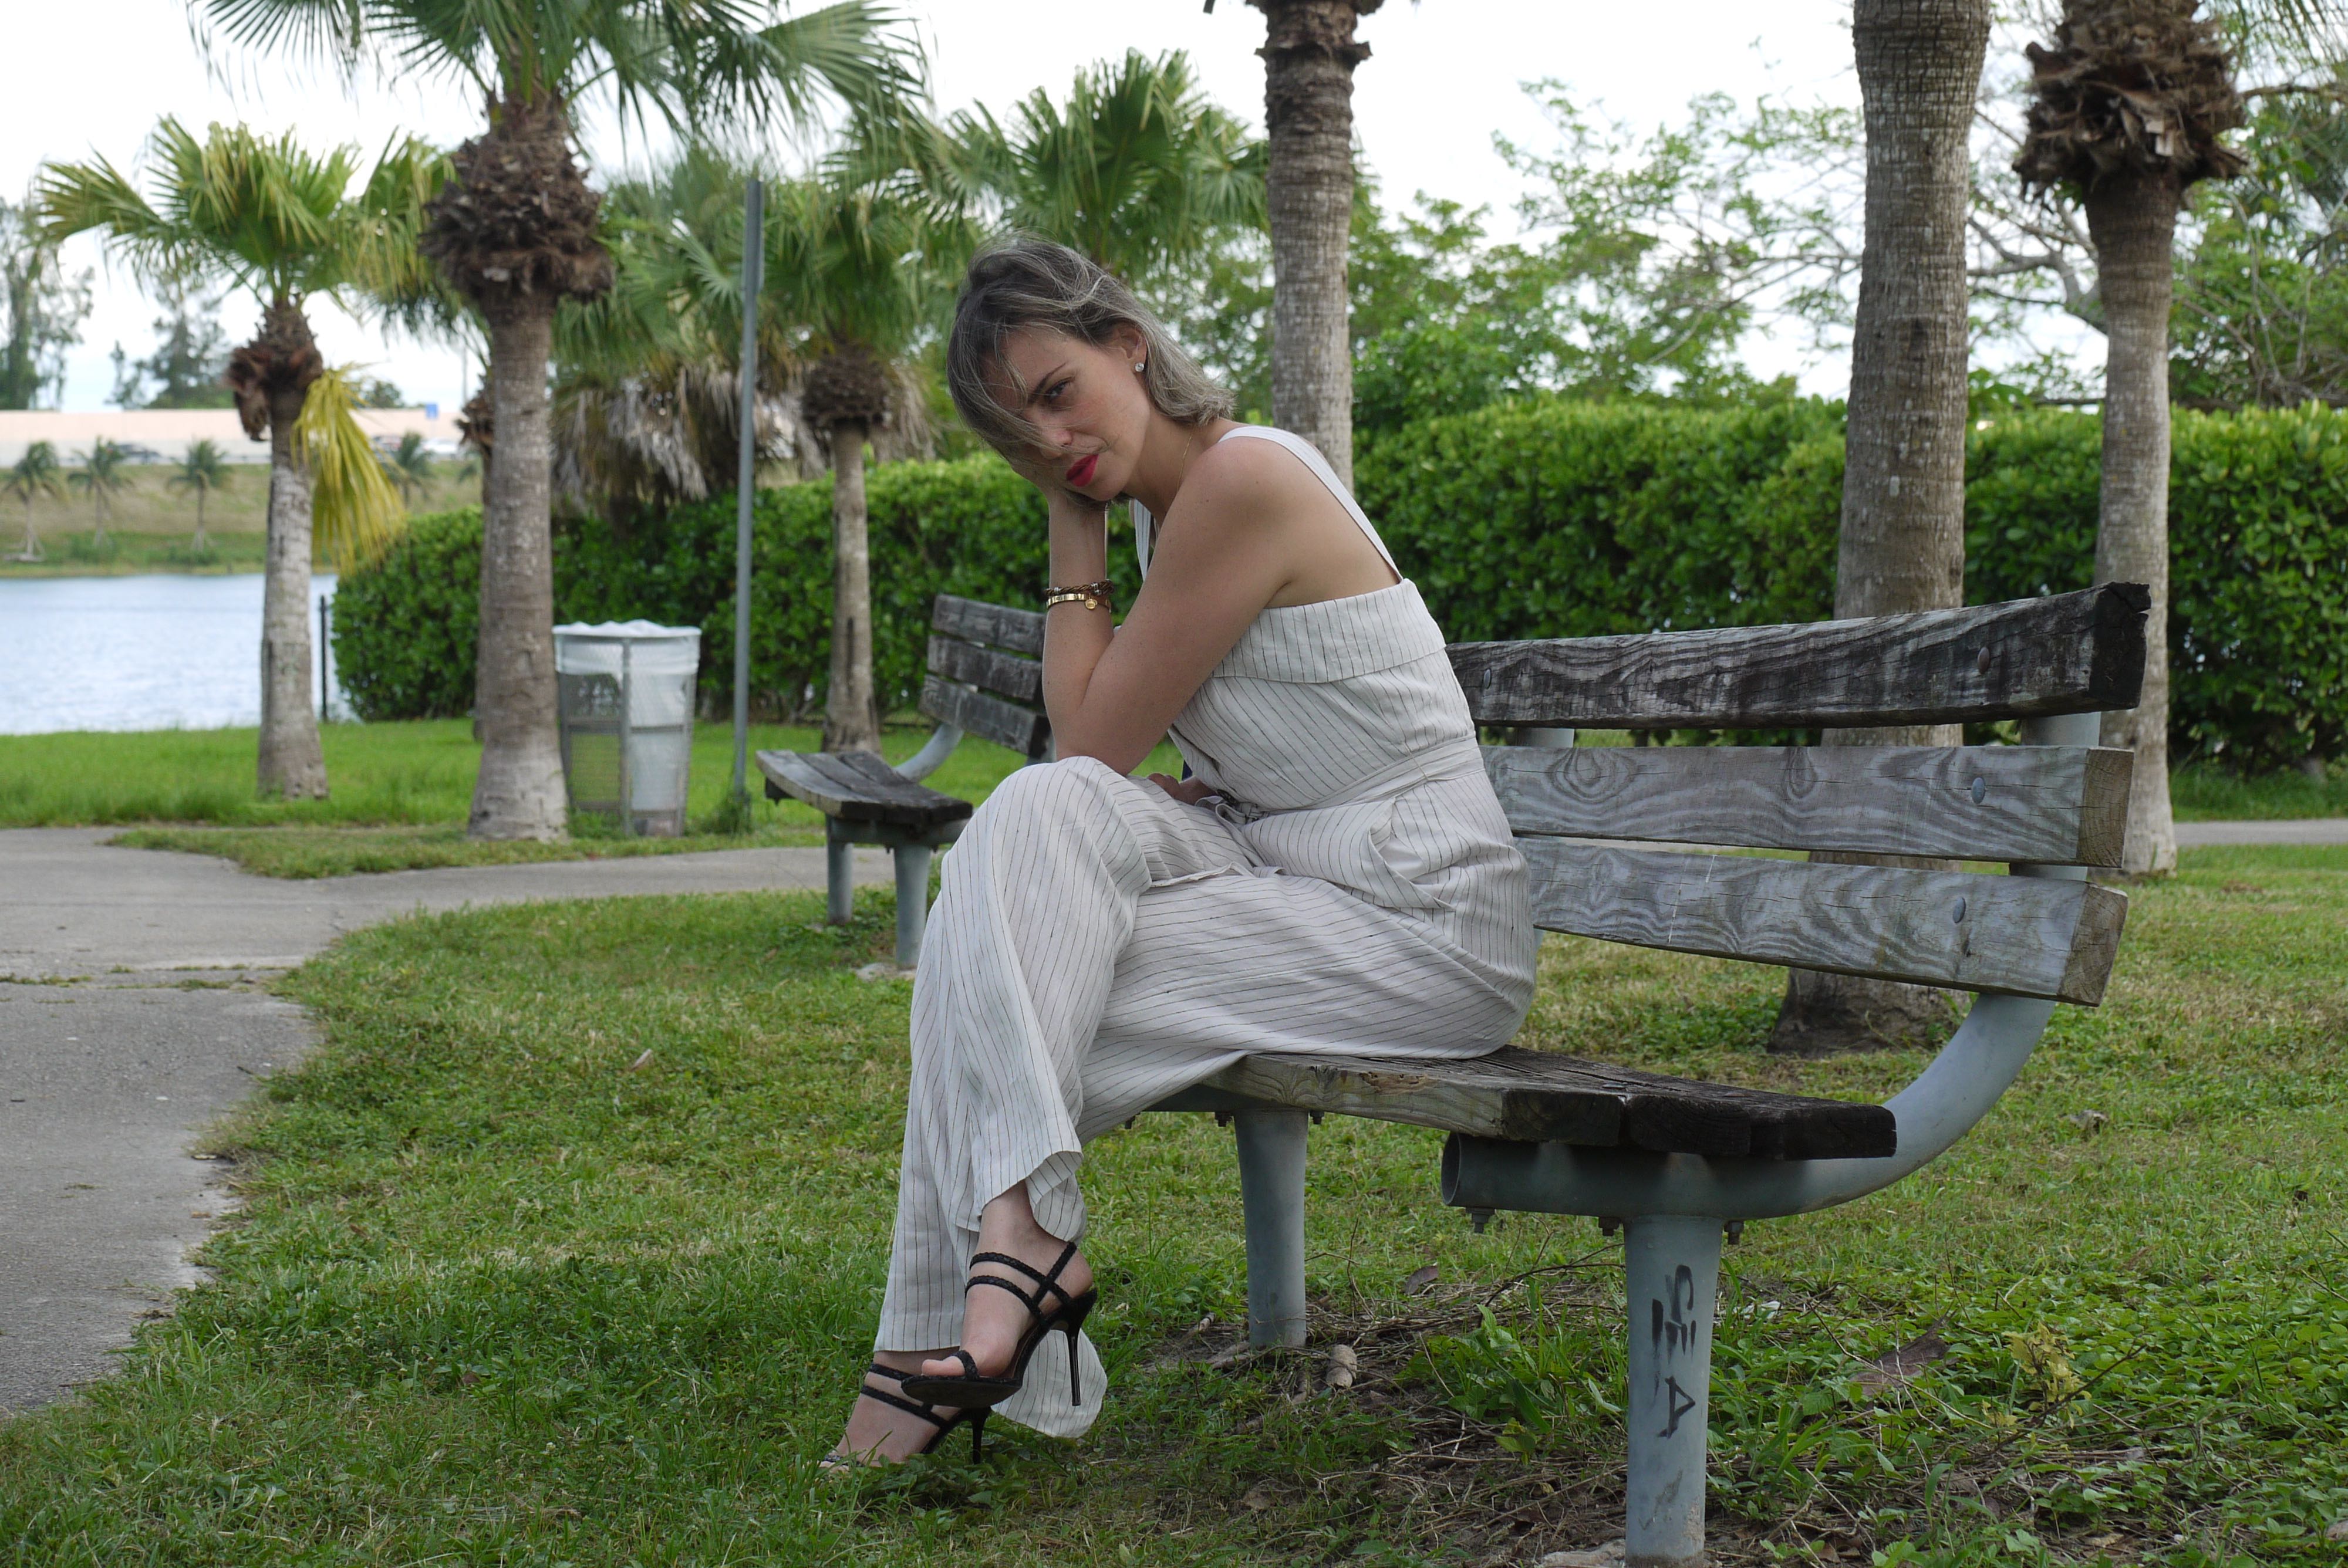 Alba Marina Otero fashion blogger from Mylovelypeople blog shares what kind of accessories wear with a jumpsuit